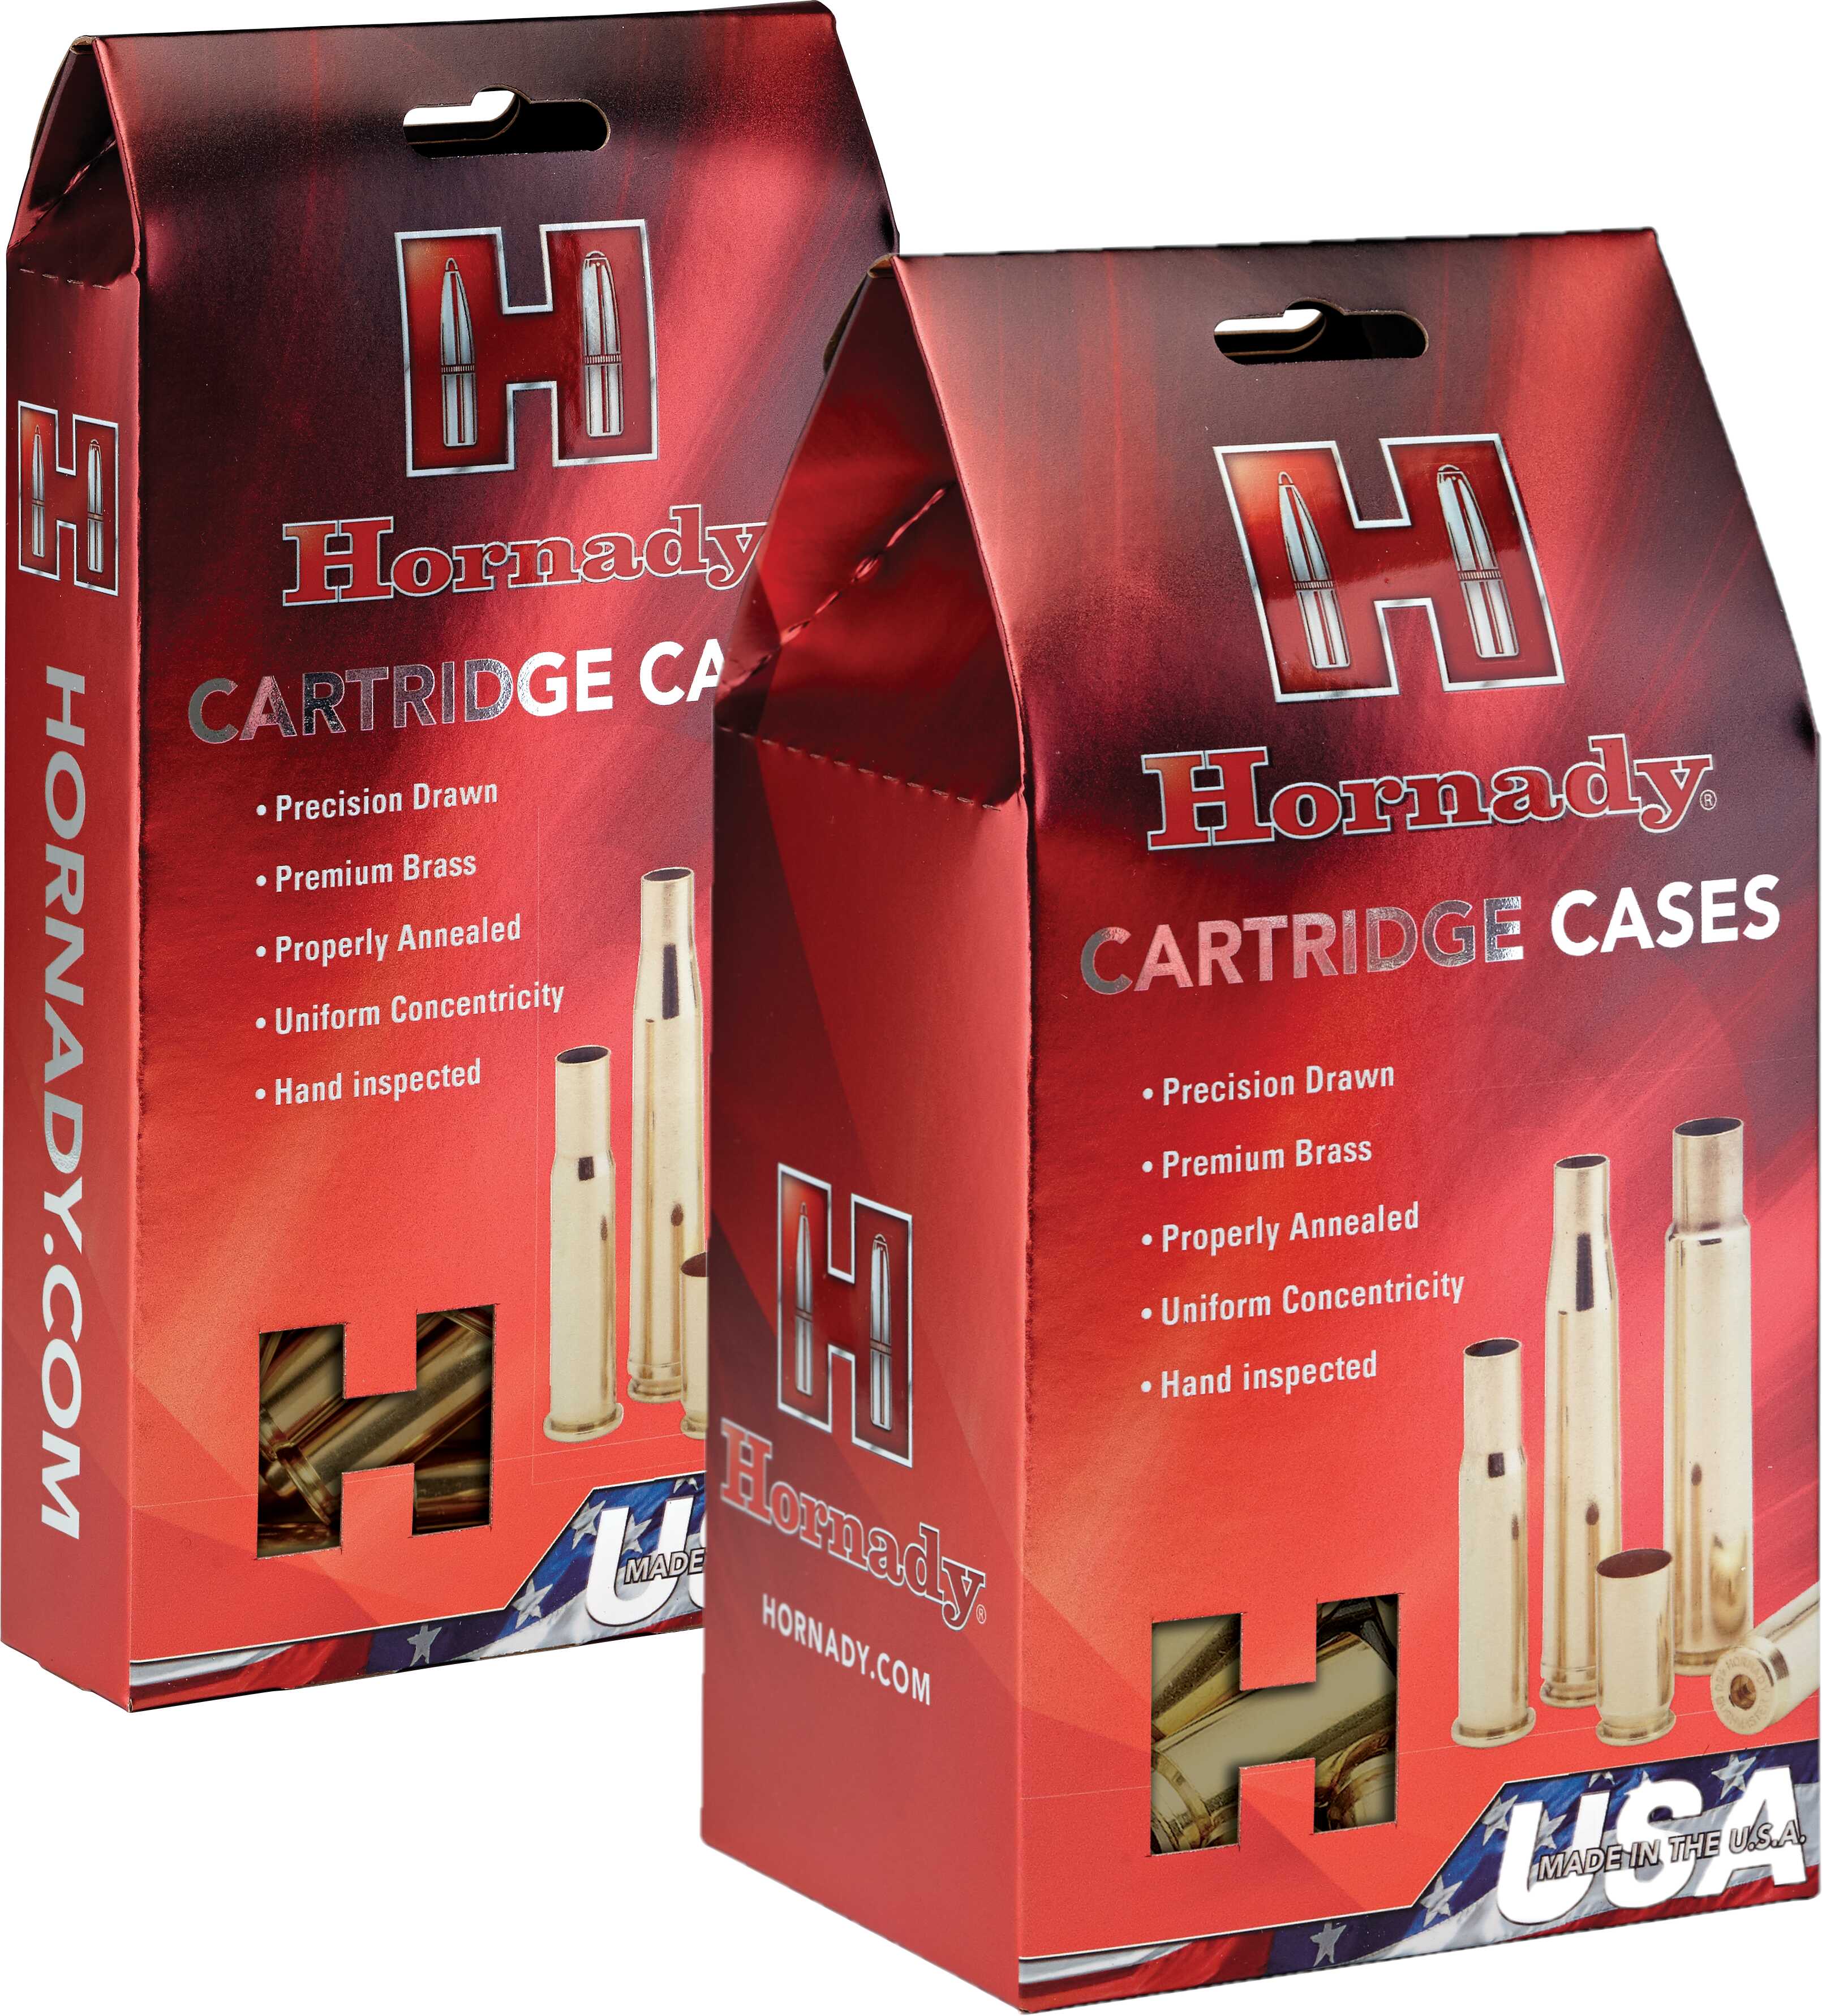 Hornady 40 Smith & Wesson Unprimed Pistol Brass 5,000 Count